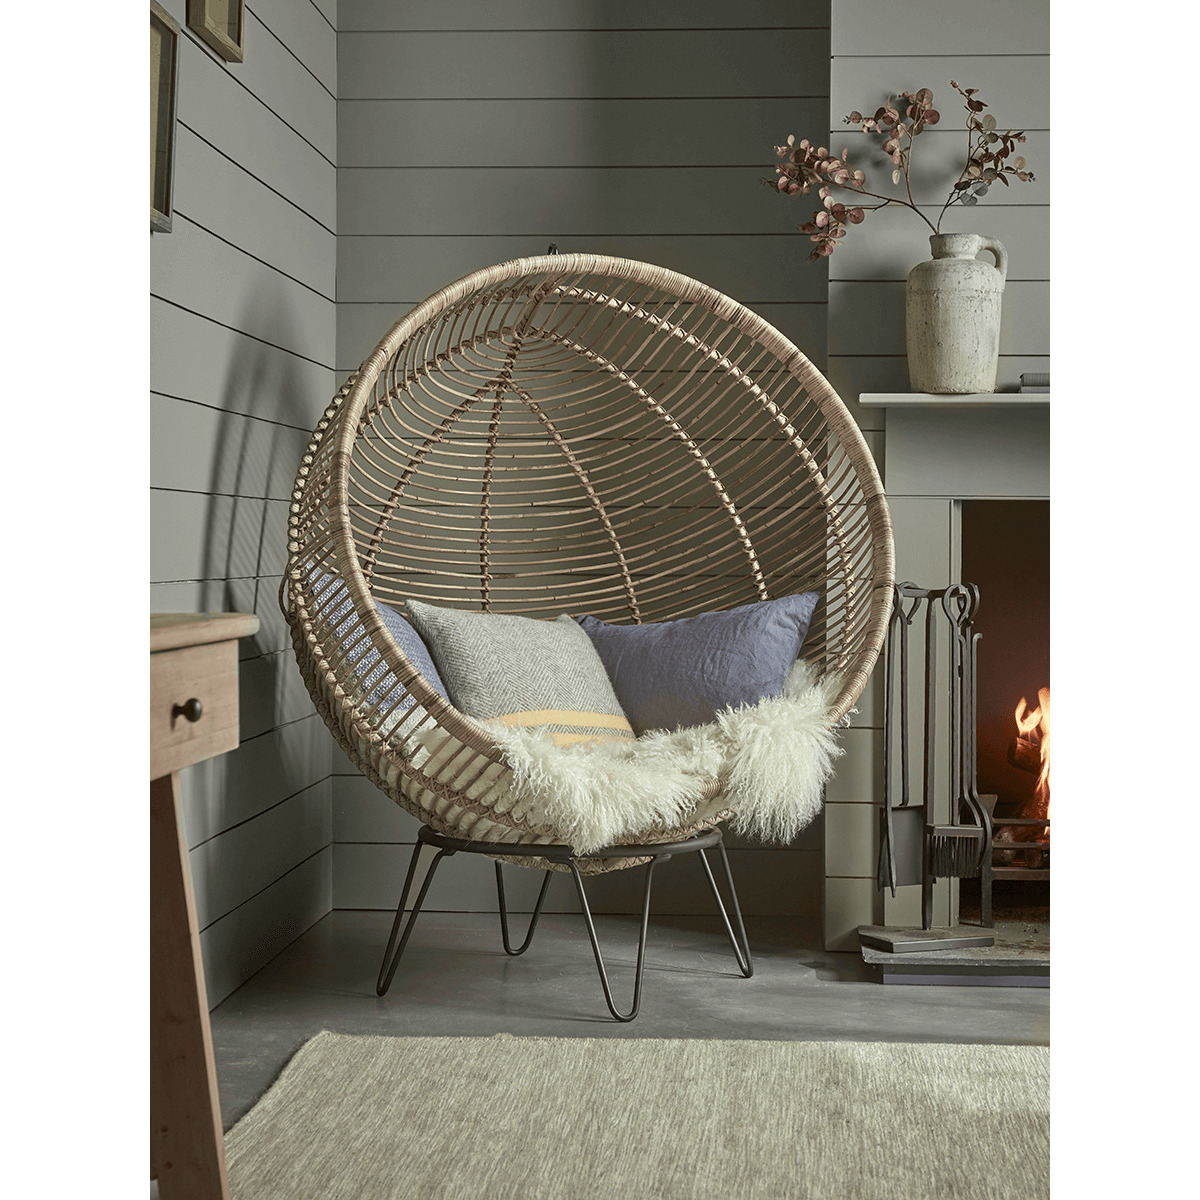 Round Rattan Cocoon Chair - image 1